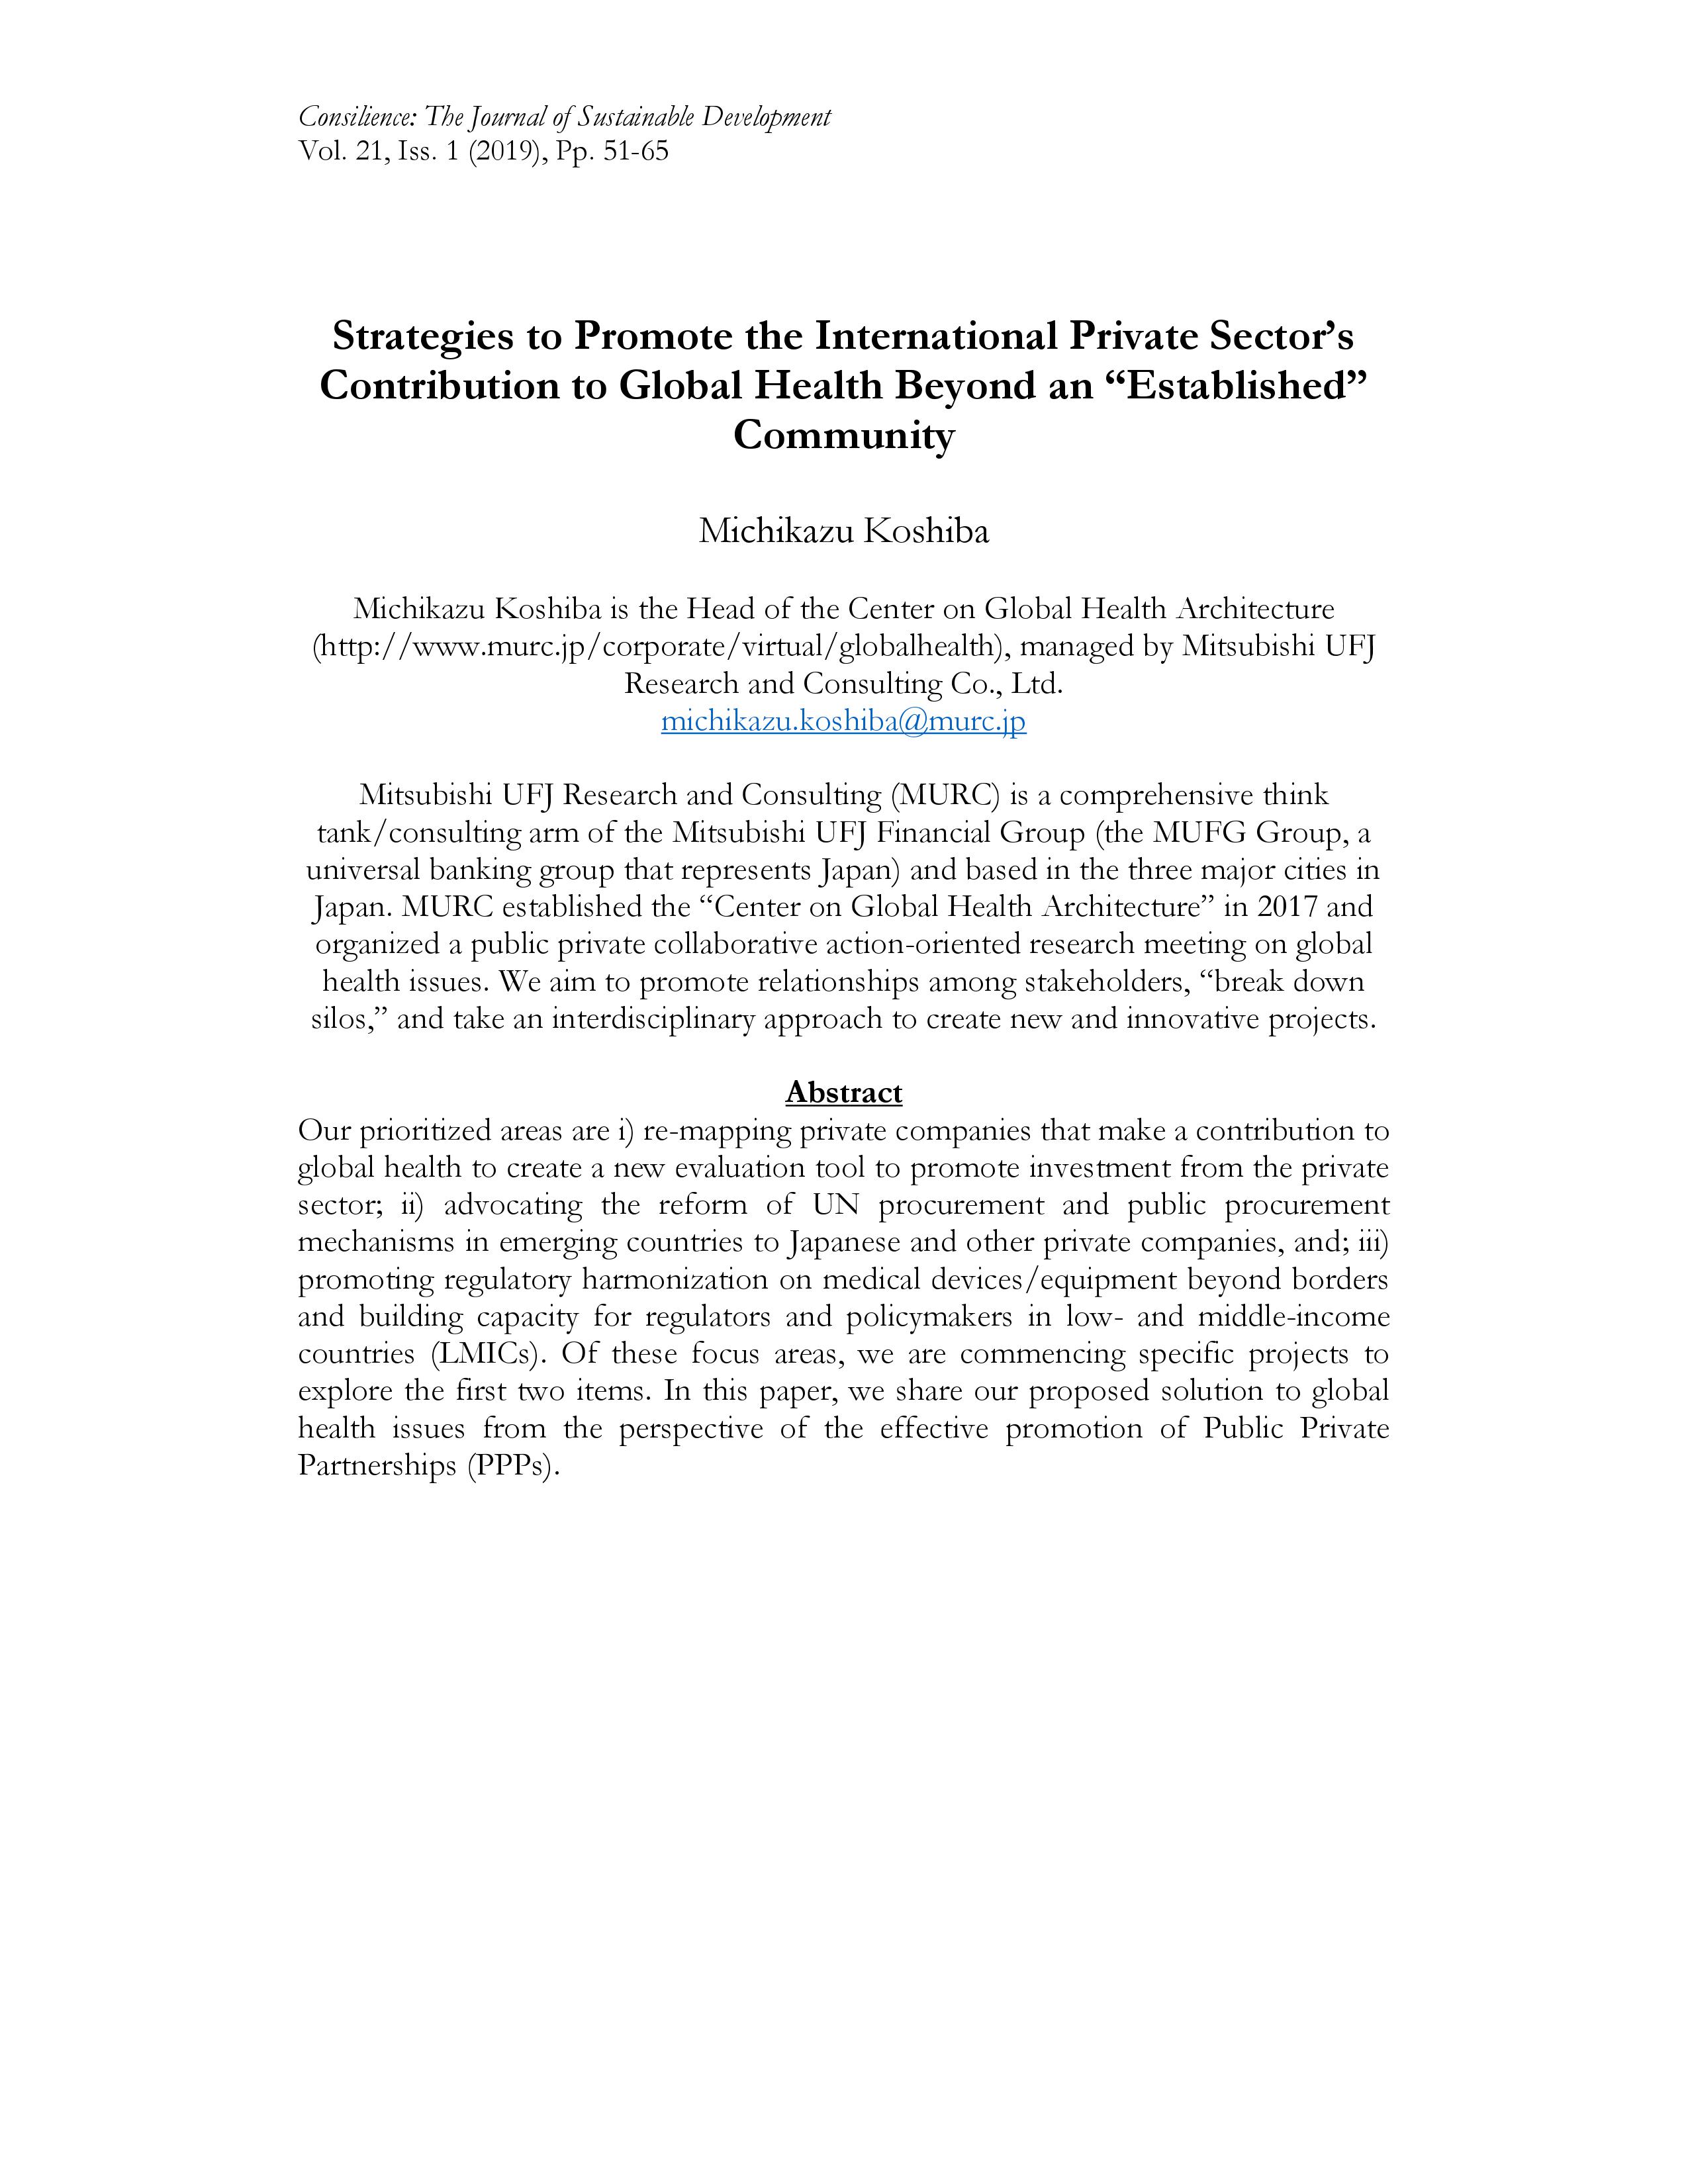 Strategies to Promote the International Private Sector’s Contribution to Global Health Beyond an “Established” Community